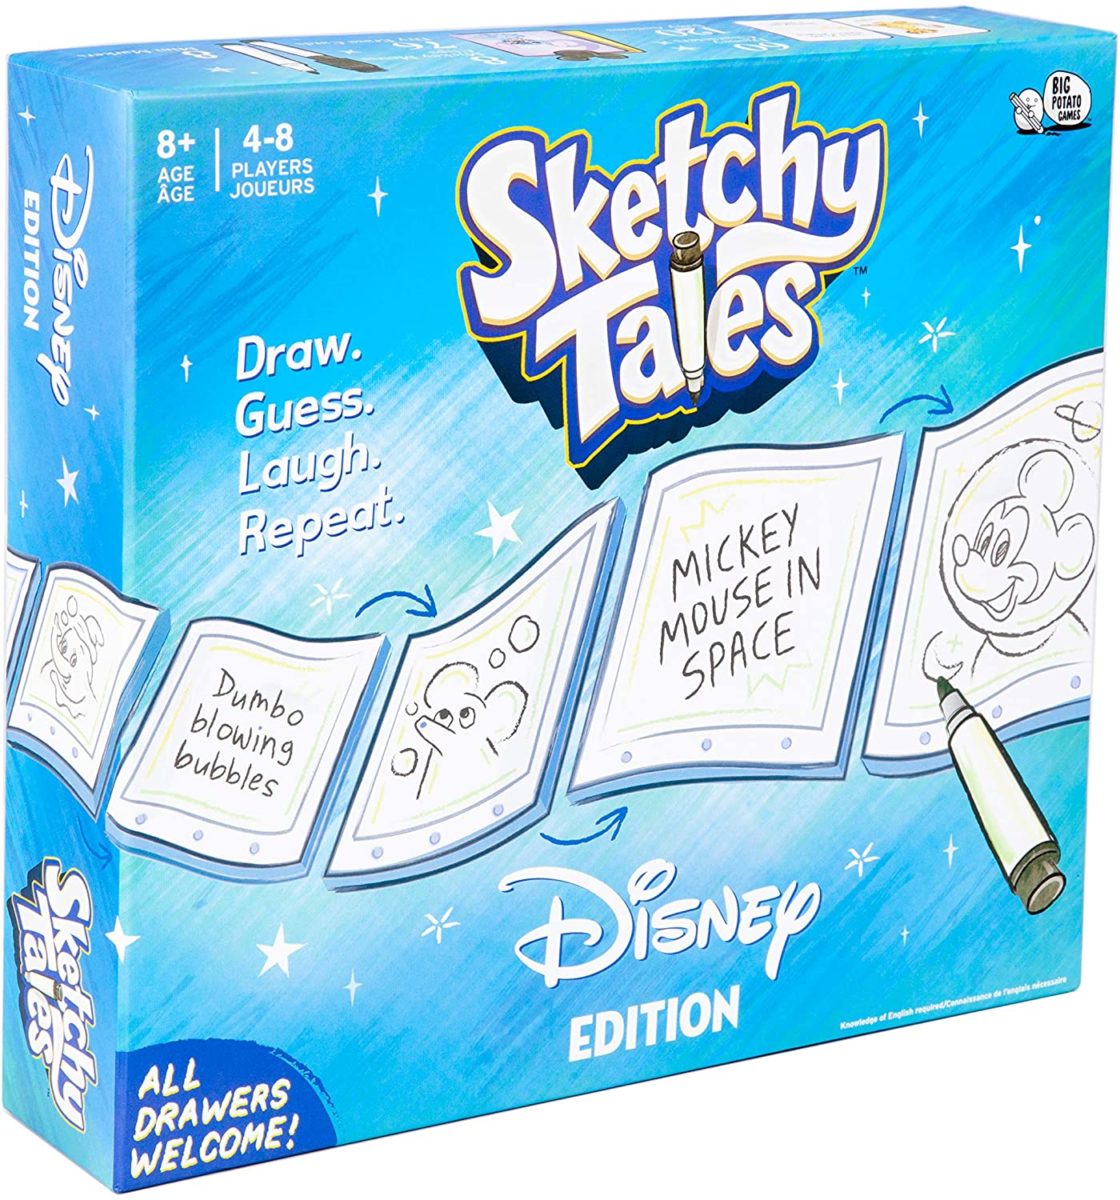 disney sketchy tales board game toys under $20 that you can give your child as rewards for good behavior